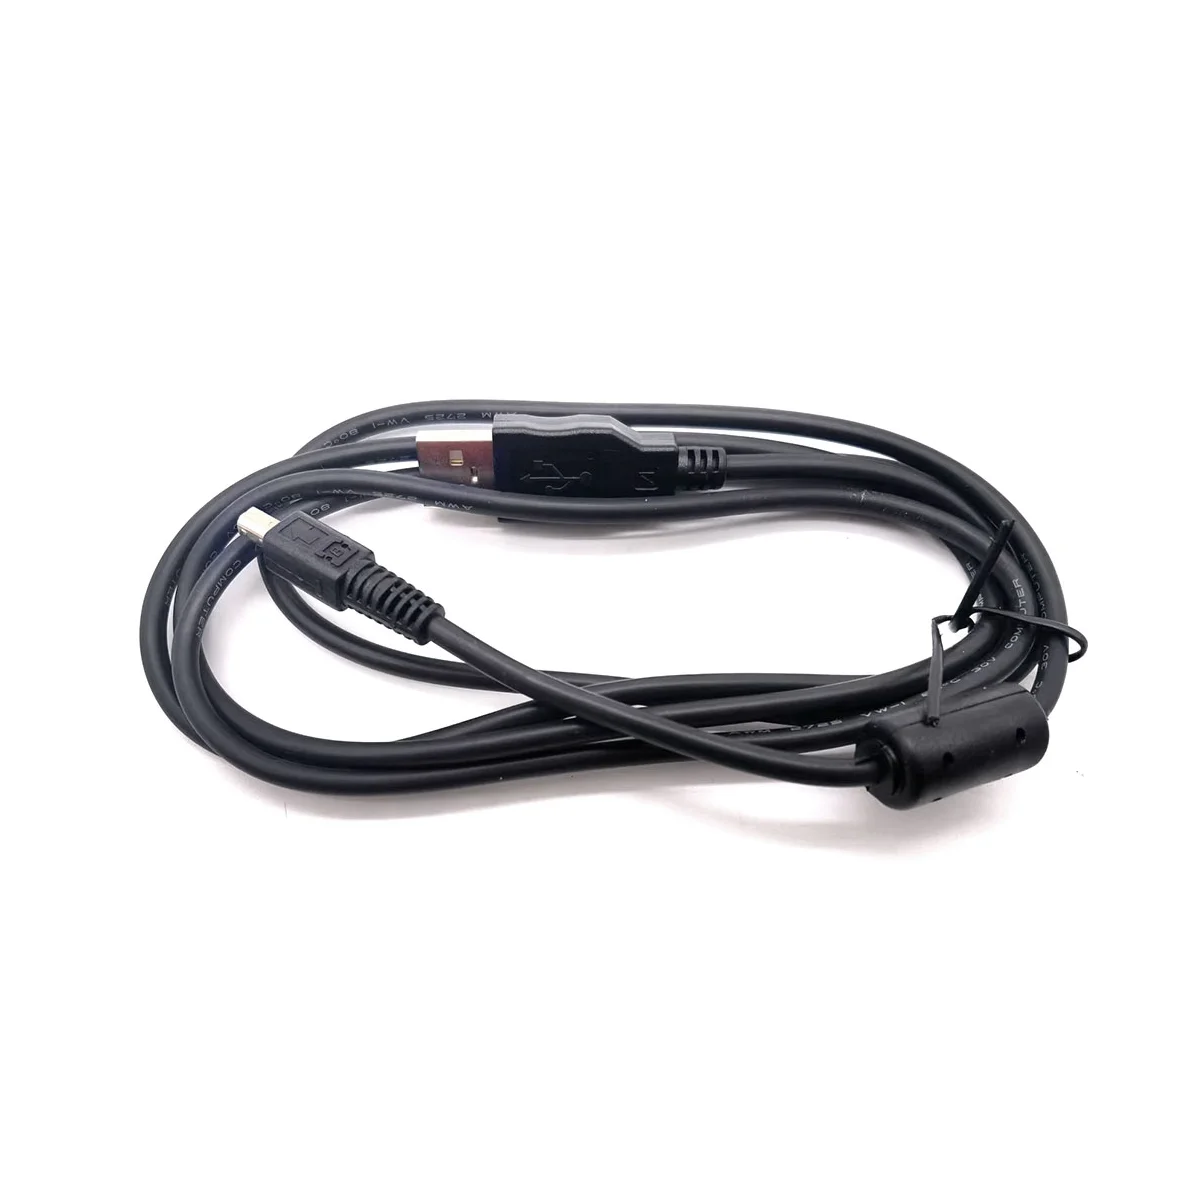 For Olympus Camera Charger USB Data Cord Cable 4Pin CB-USB1(D-Port) C-1 C-2 C-200 C-2040 C-2100 C-211 C-700 D-100 D-150